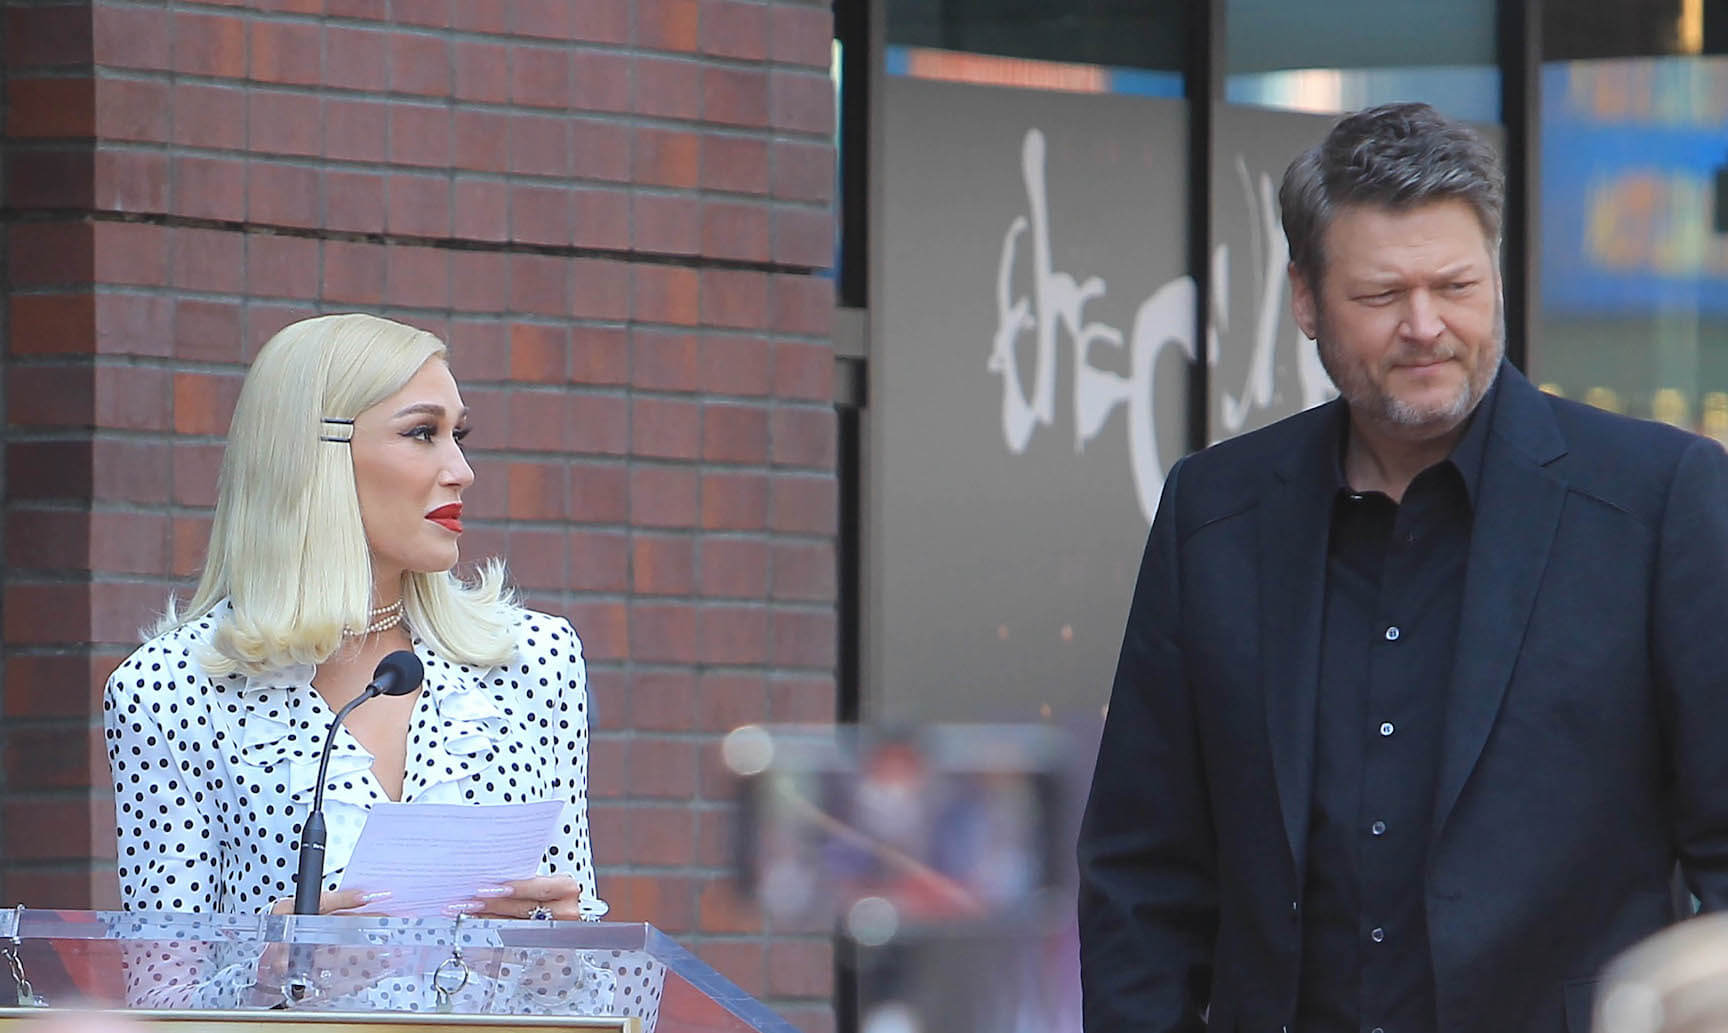 Gwen Stefani and Blake Shelton standing next to each other while Stefani gives a speech in Los Angeles